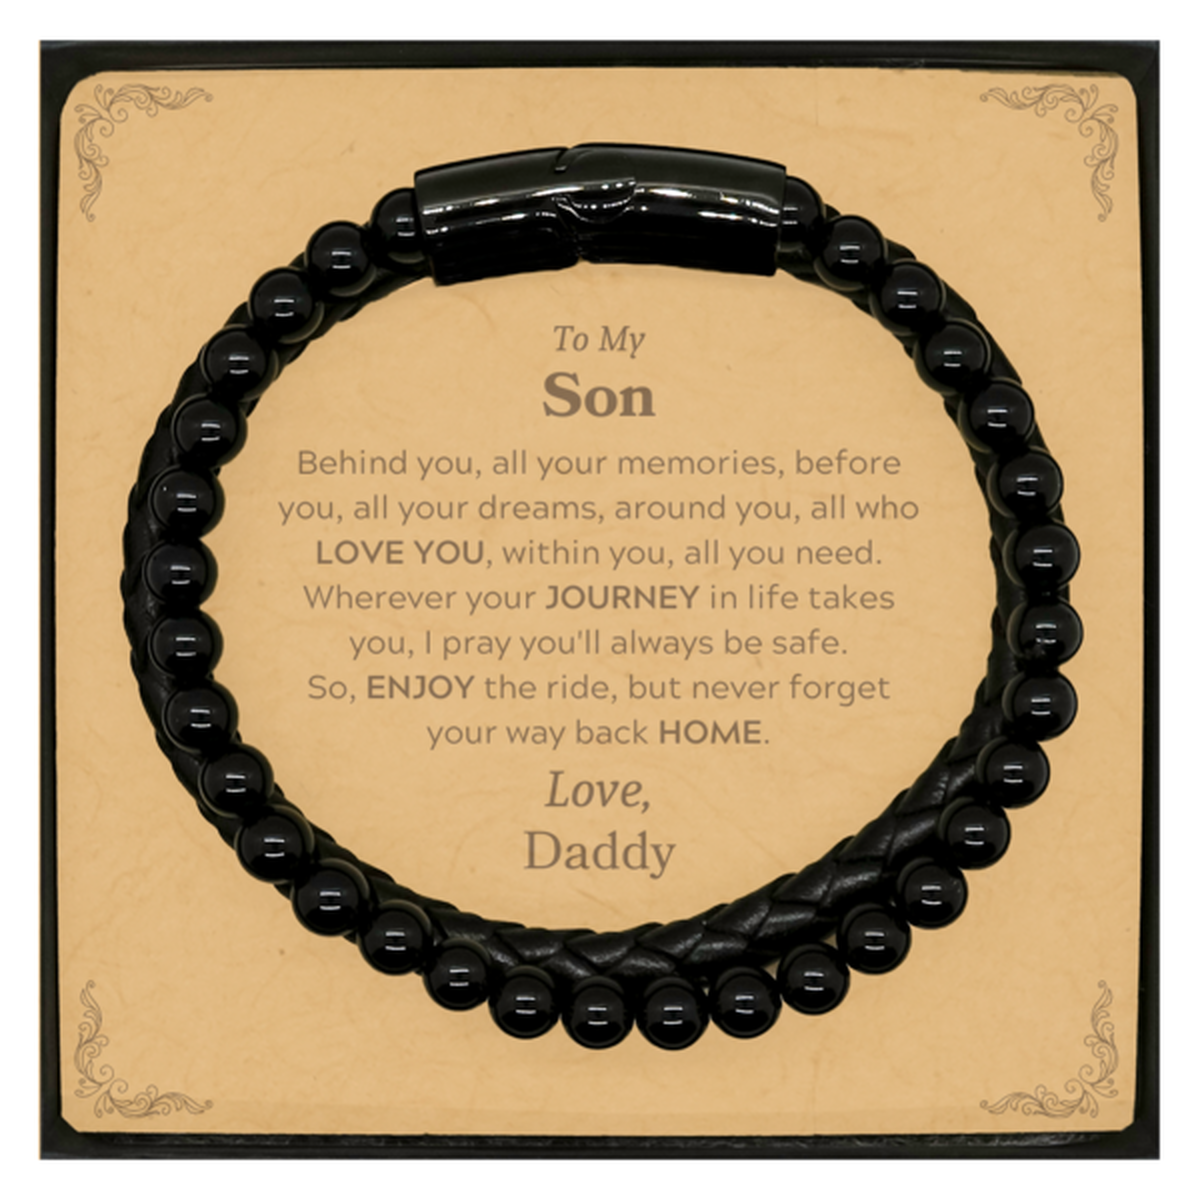 To My Son Graduation Gifts from Daddy, Son Stone Leather Bracelets Christmas Birthday Gifts for Son Behind you, all your memories, before you, all your dreams. Love, Daddy